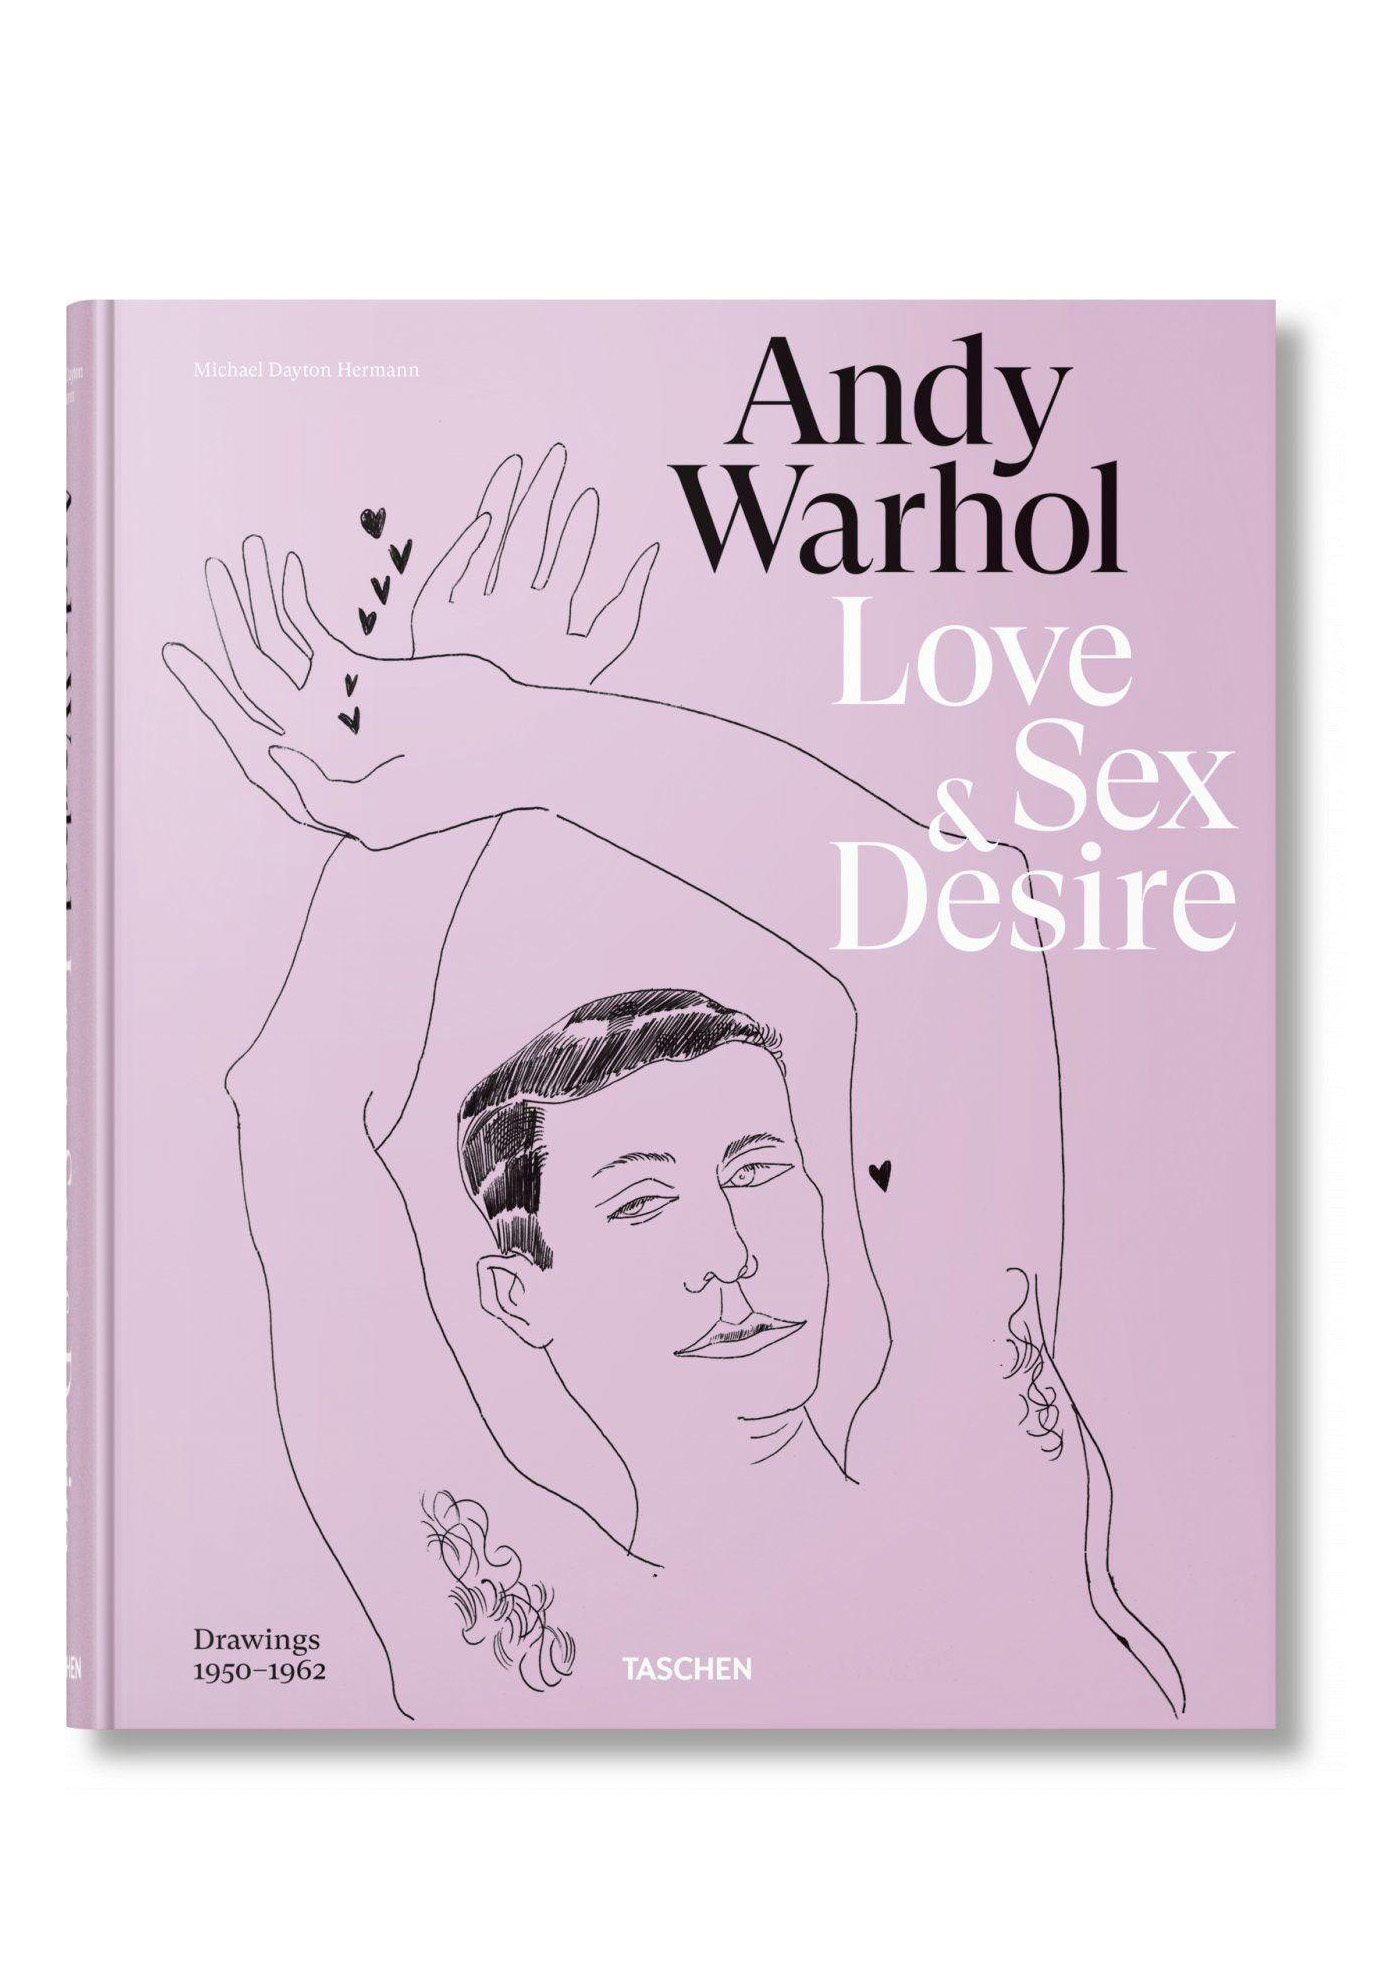 Andy Warhol | Love, Sex and Desire